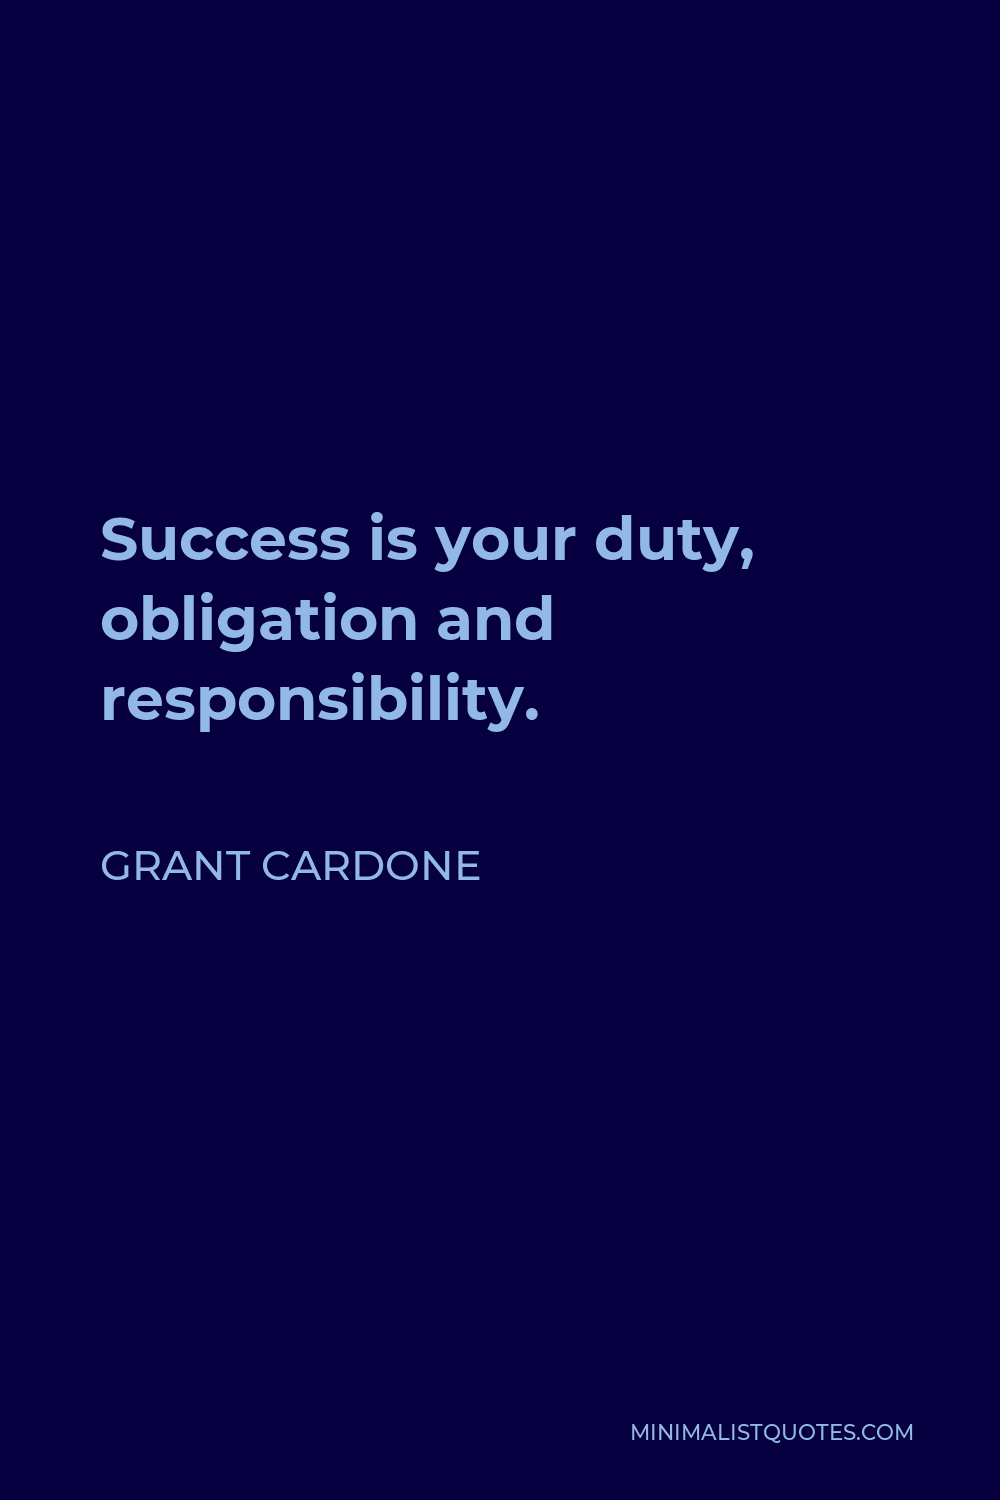 Grant Cardone Quote - Success is your duty, obligation and responsibility.